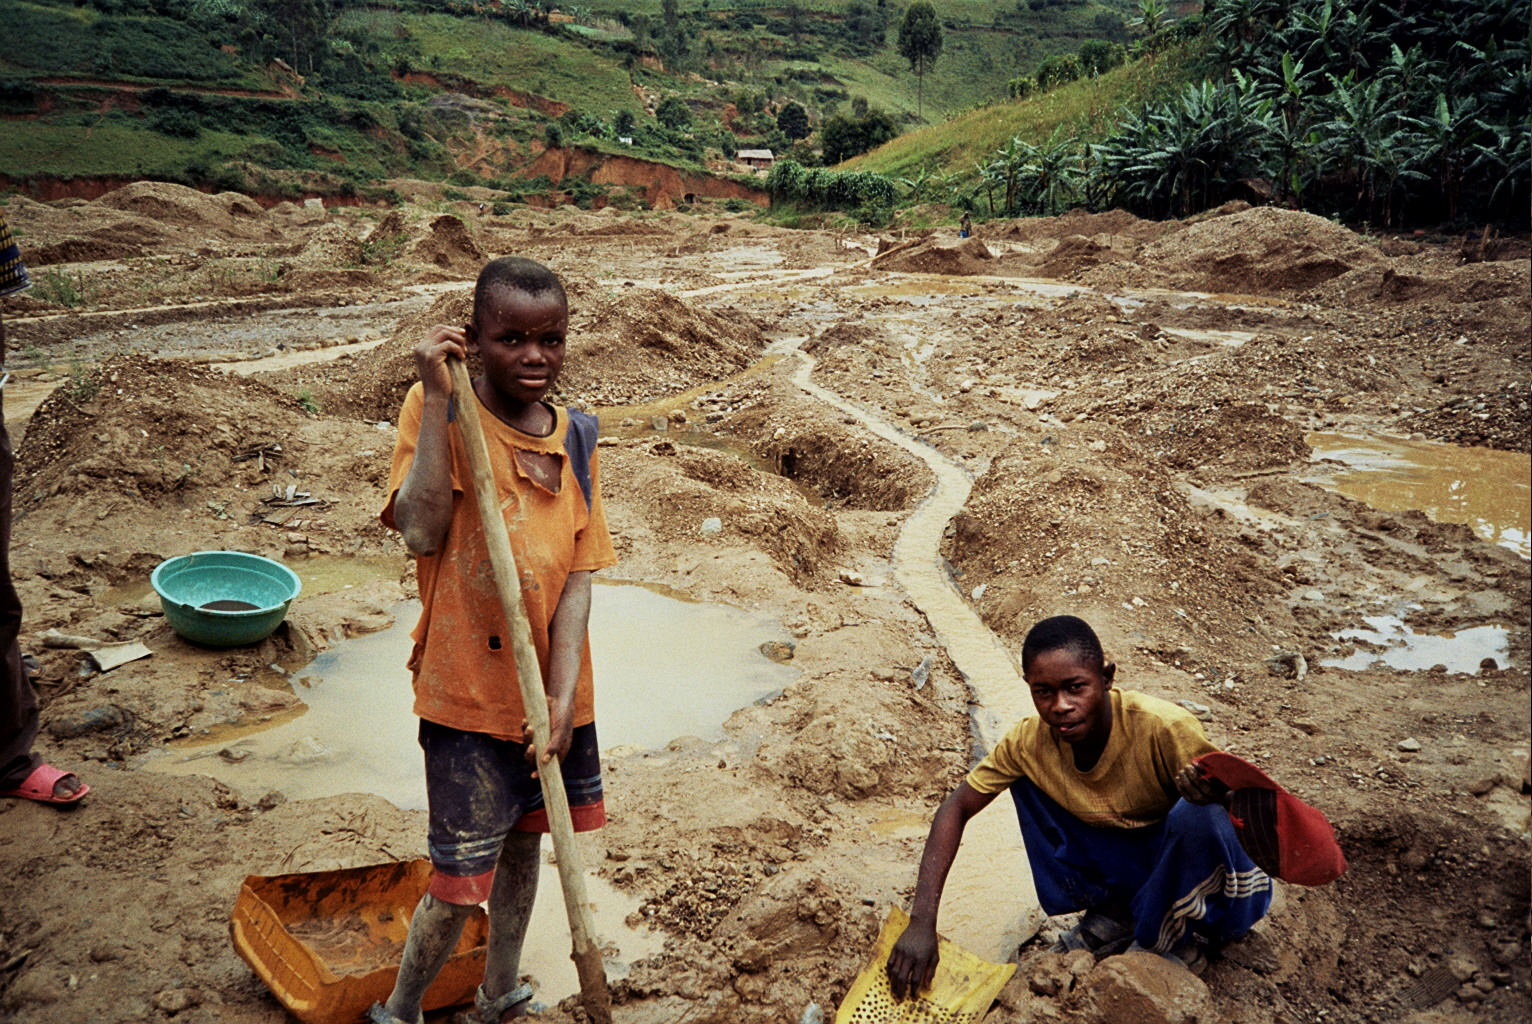 EU: Conflict Minerals agreement reached as exemptions added